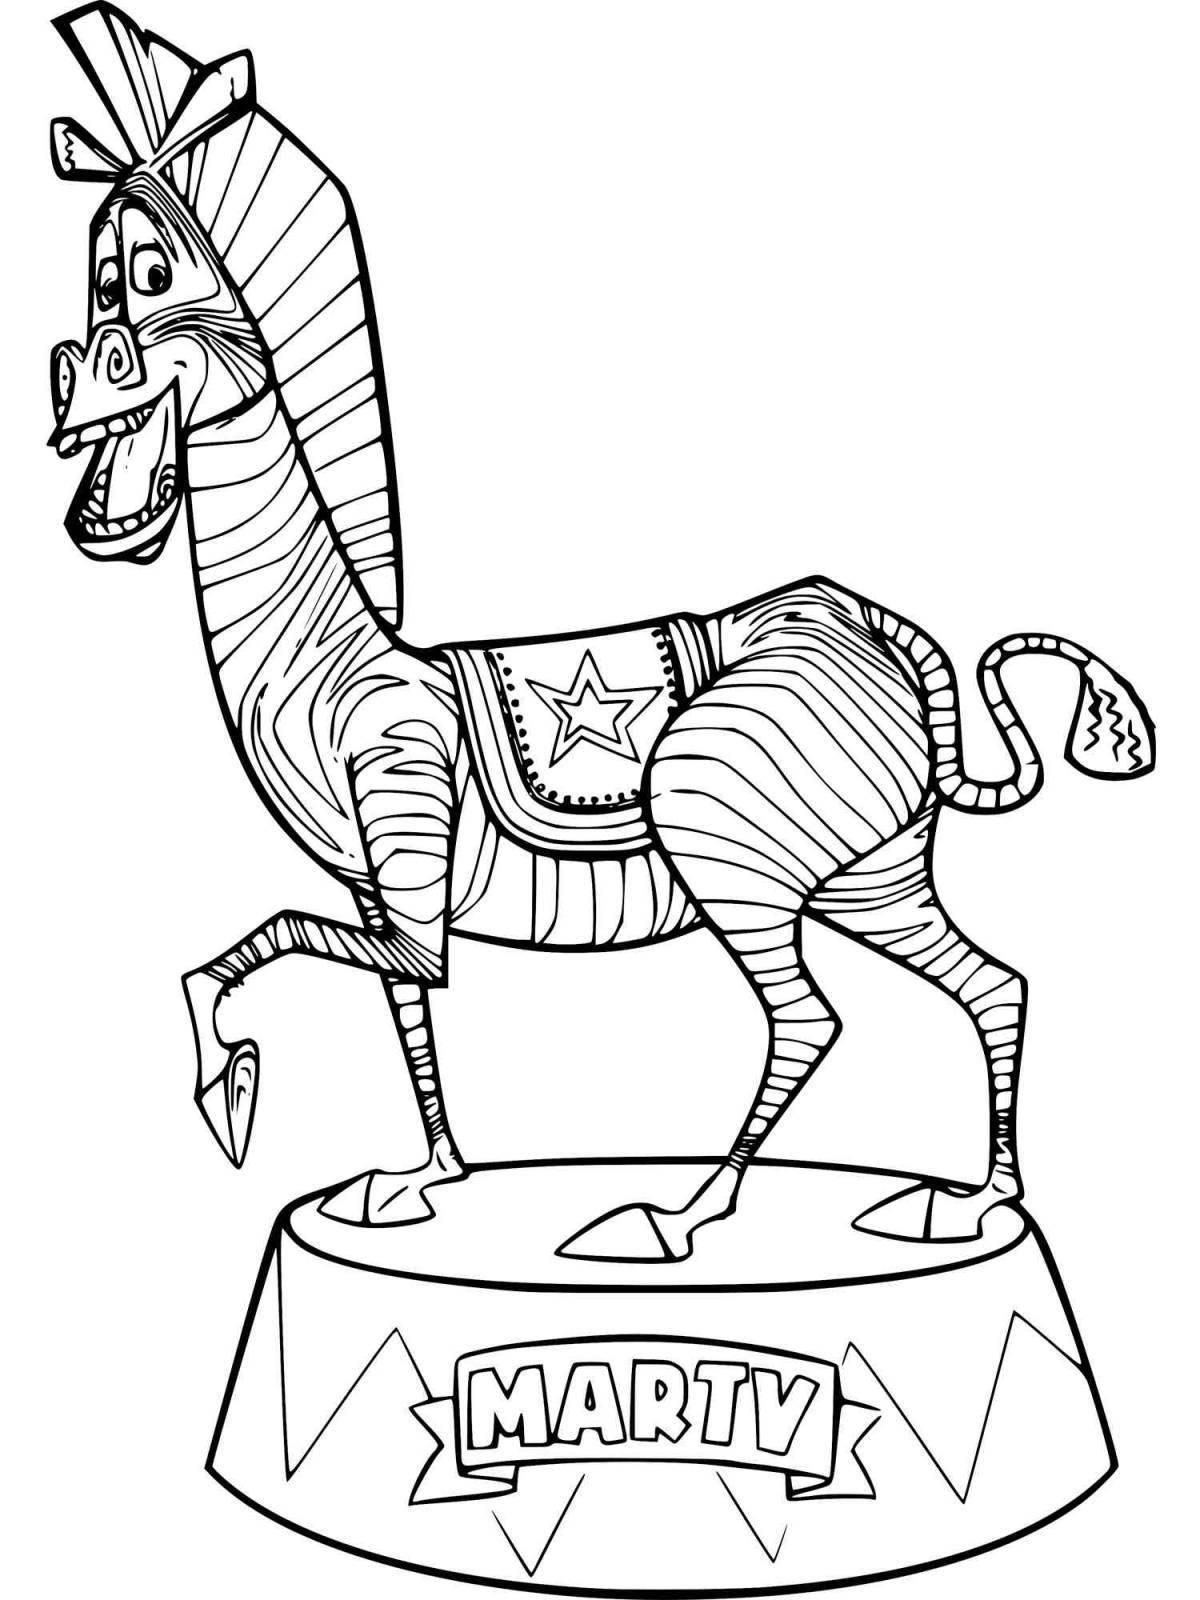 Merry Madagascar 3 coloring